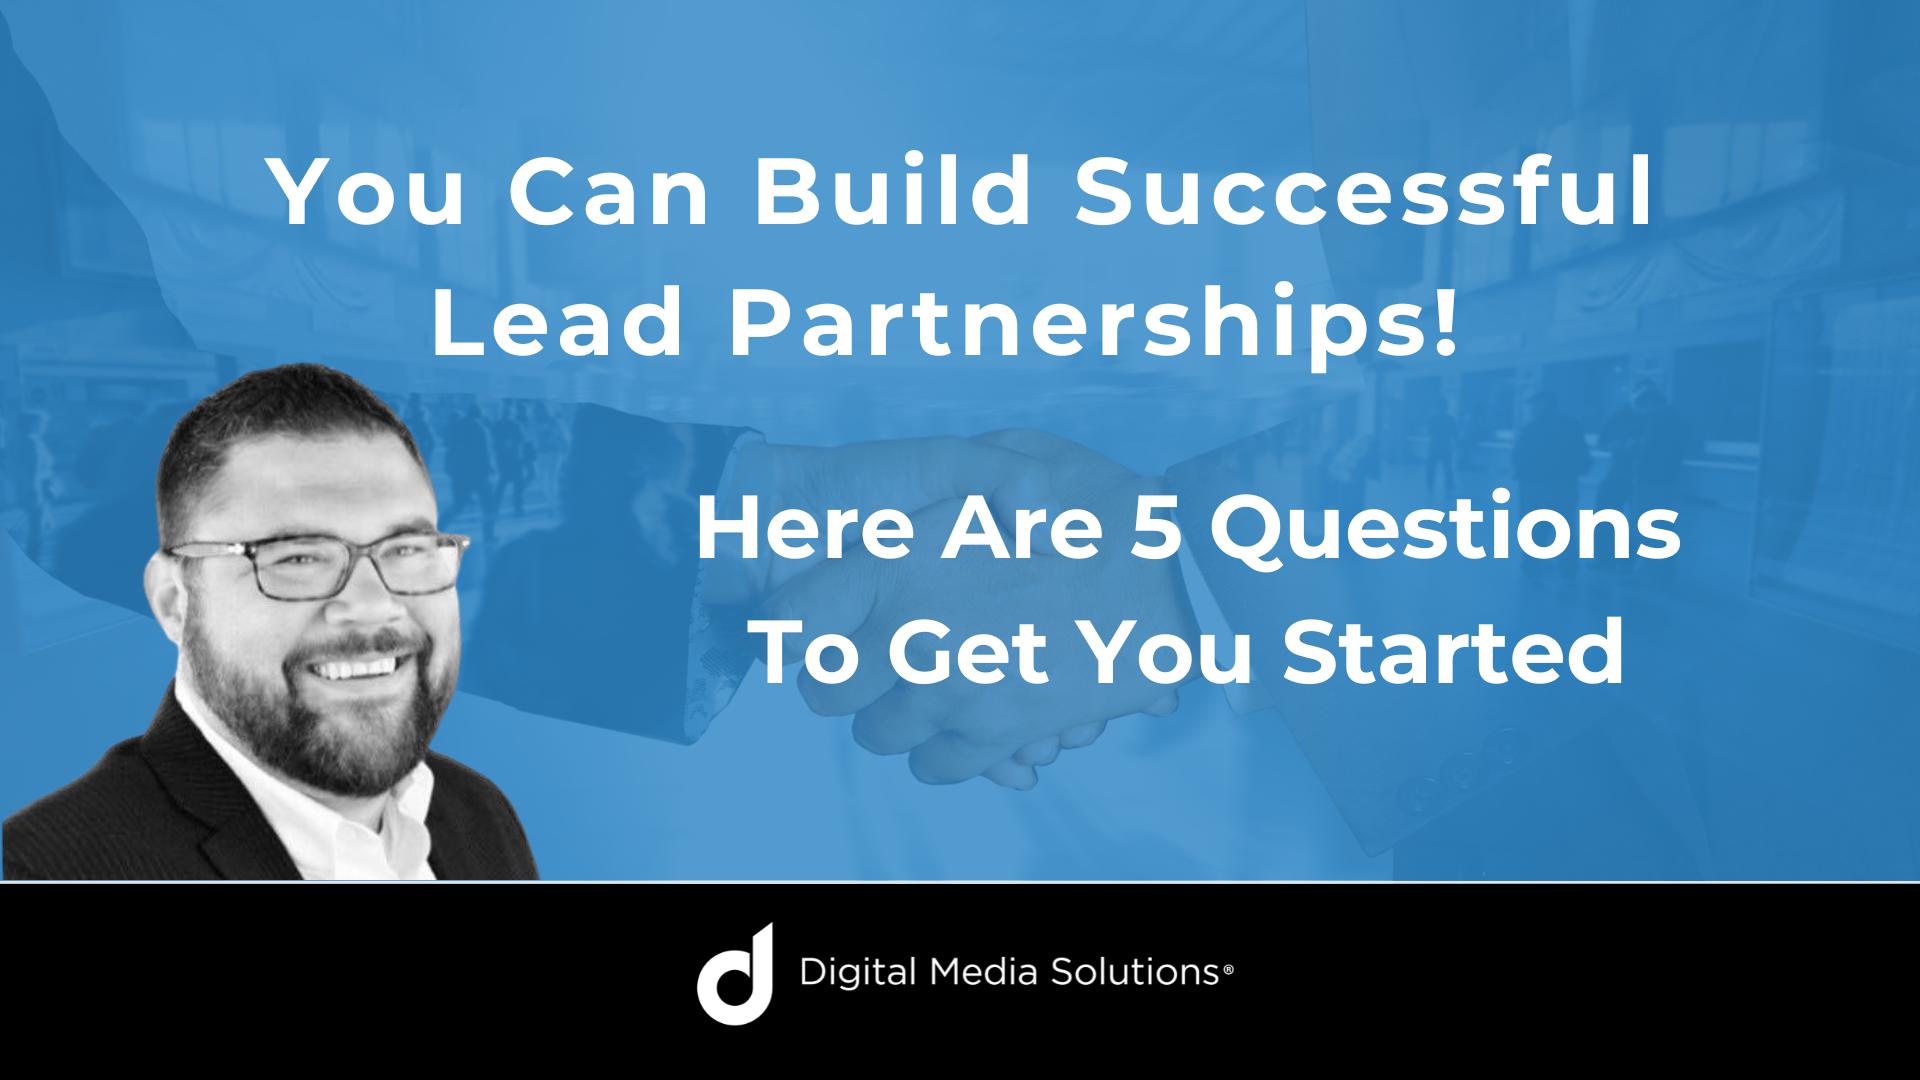 You Can Build Successful Lead Partnerships! Here Are 5 Questions To Get You Started